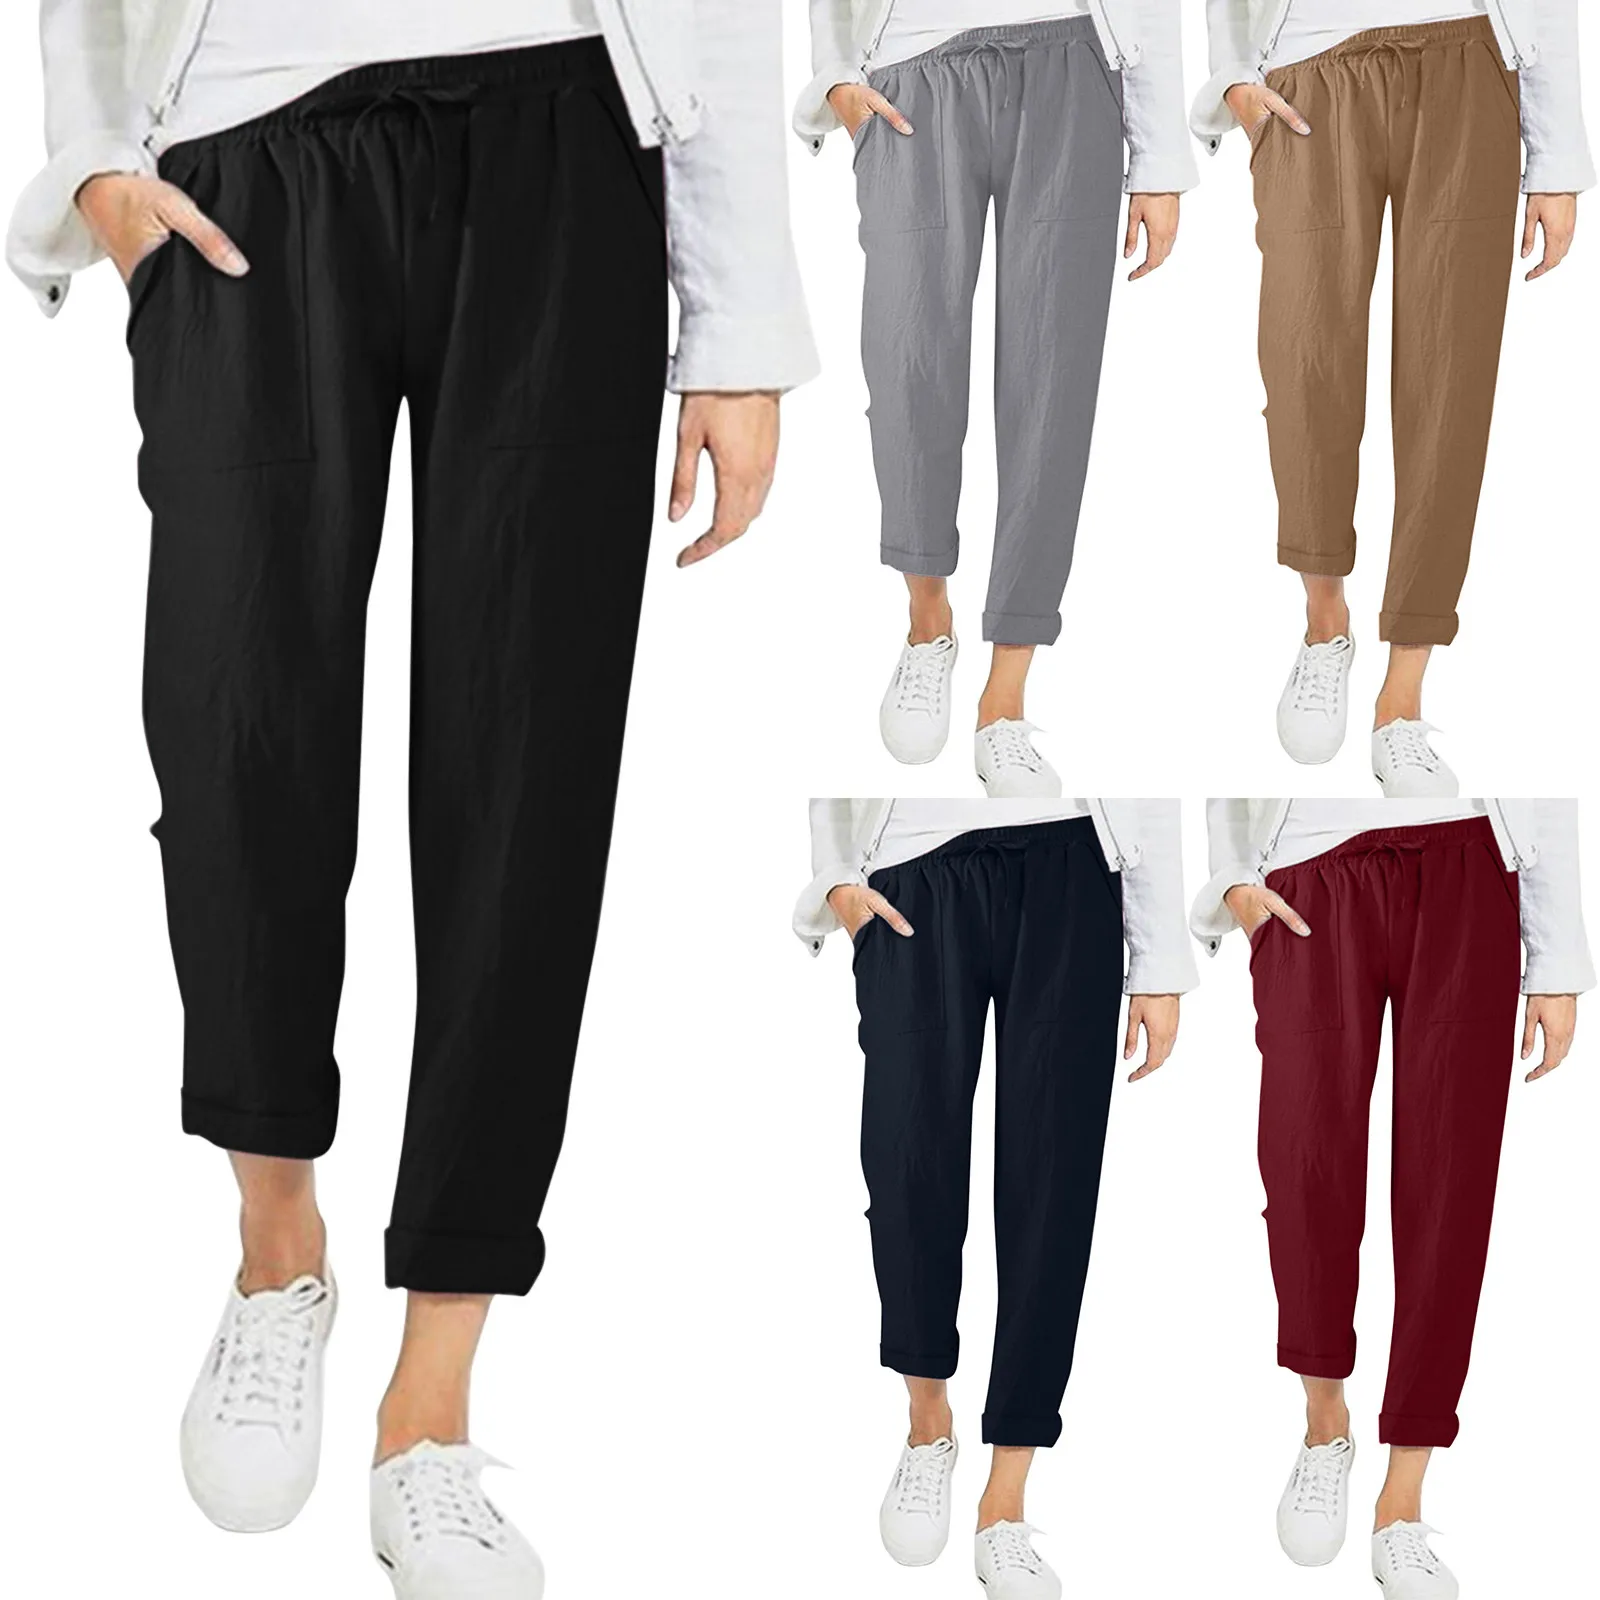 Cotton Linen Pants Women Casual Spring Summer High Waist Elastic Ankle-Length Pants Female Solid Pockets Harem Trousers 2024 summer jeans woman high waist mom jeans pockets zipper female pants cotton elastic denim pants harem jeans